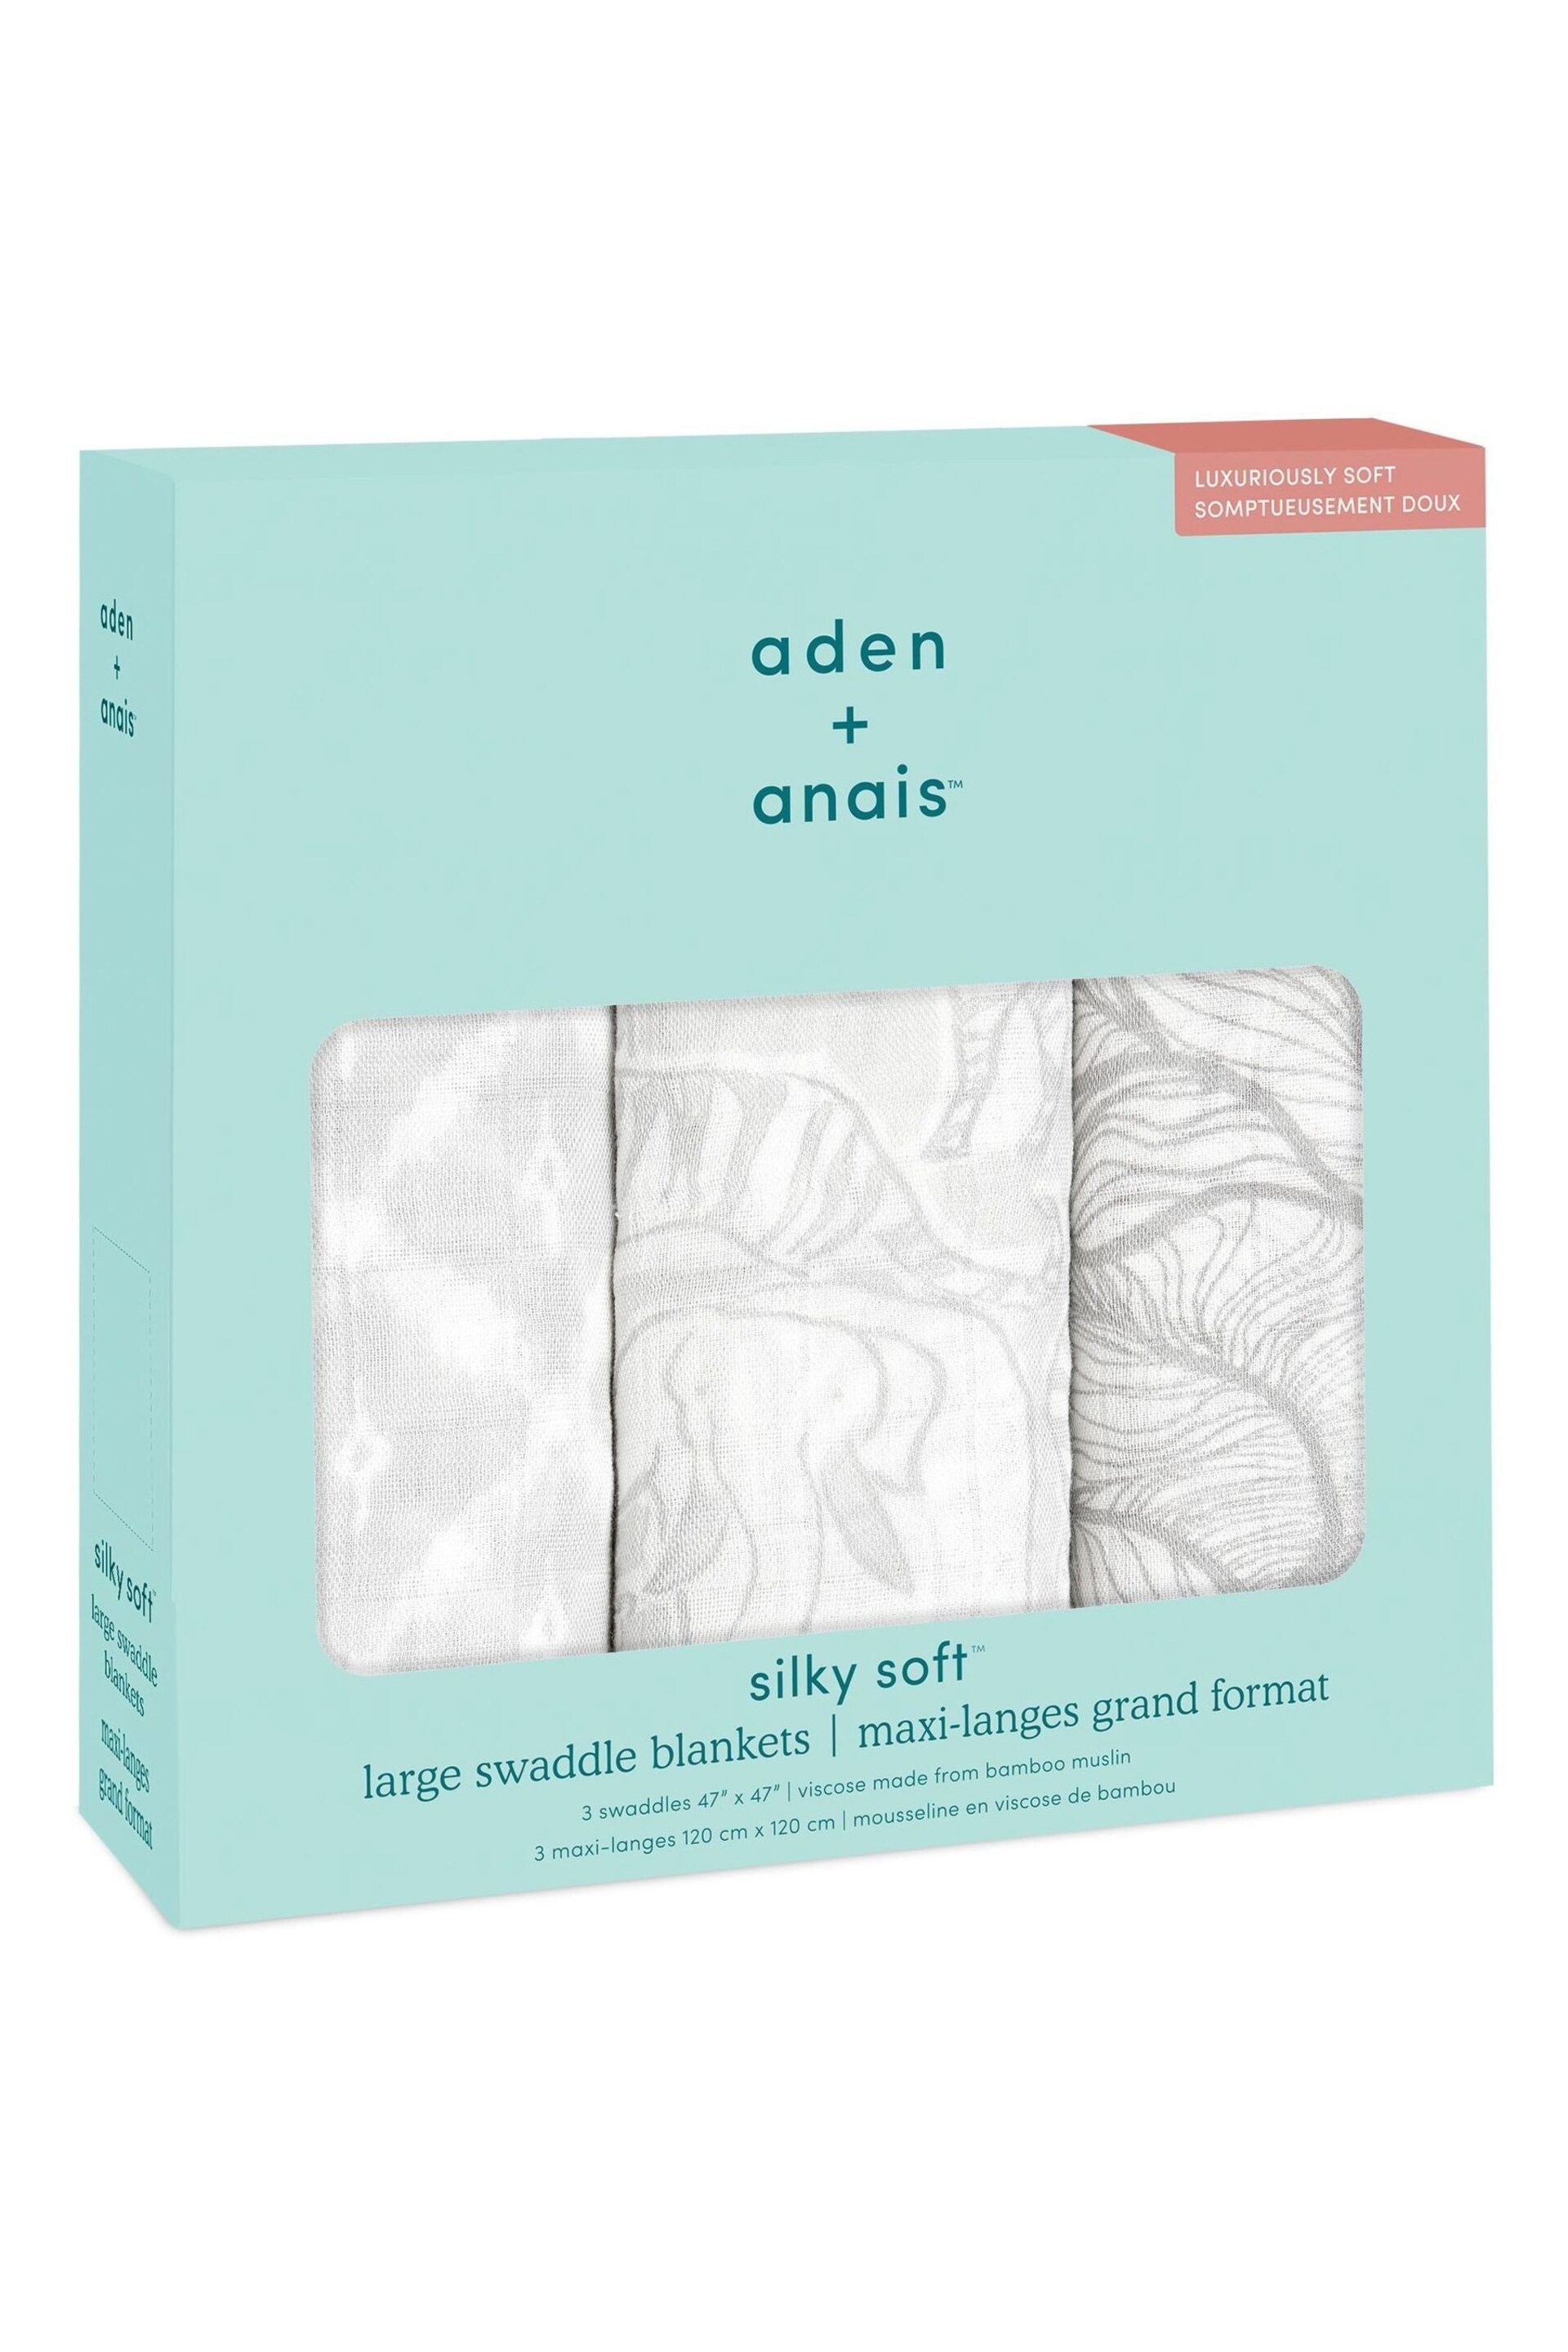 aden + anais™ Large Silky Soft Culture Club Muslin Blanket 3 Pack - Image 2 of 9